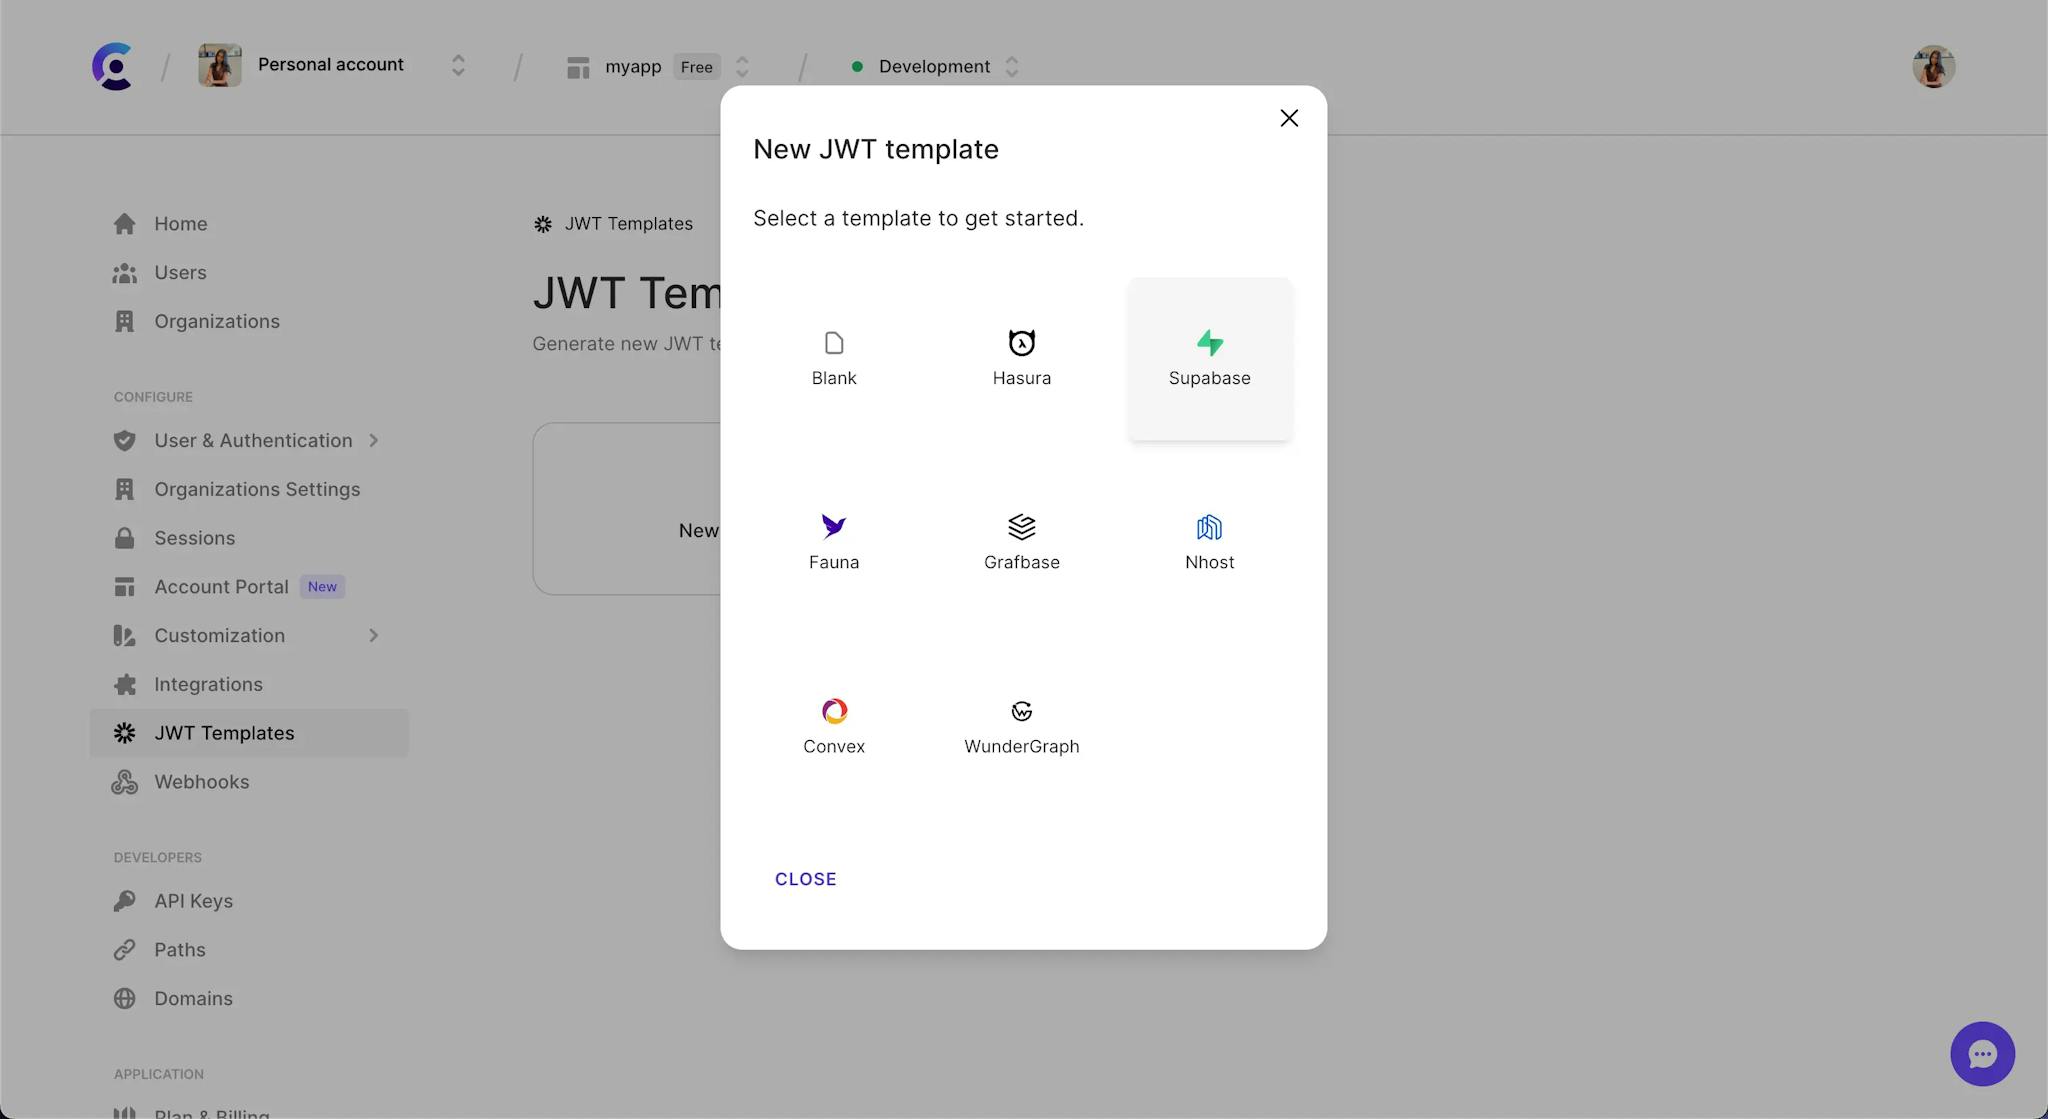 The JWT Templates page in the Clerk Dashboard. The 'New template' button was clicked, and a pop up titled 'New JWT template' is shown. The 'Supabase' template is hovered over.